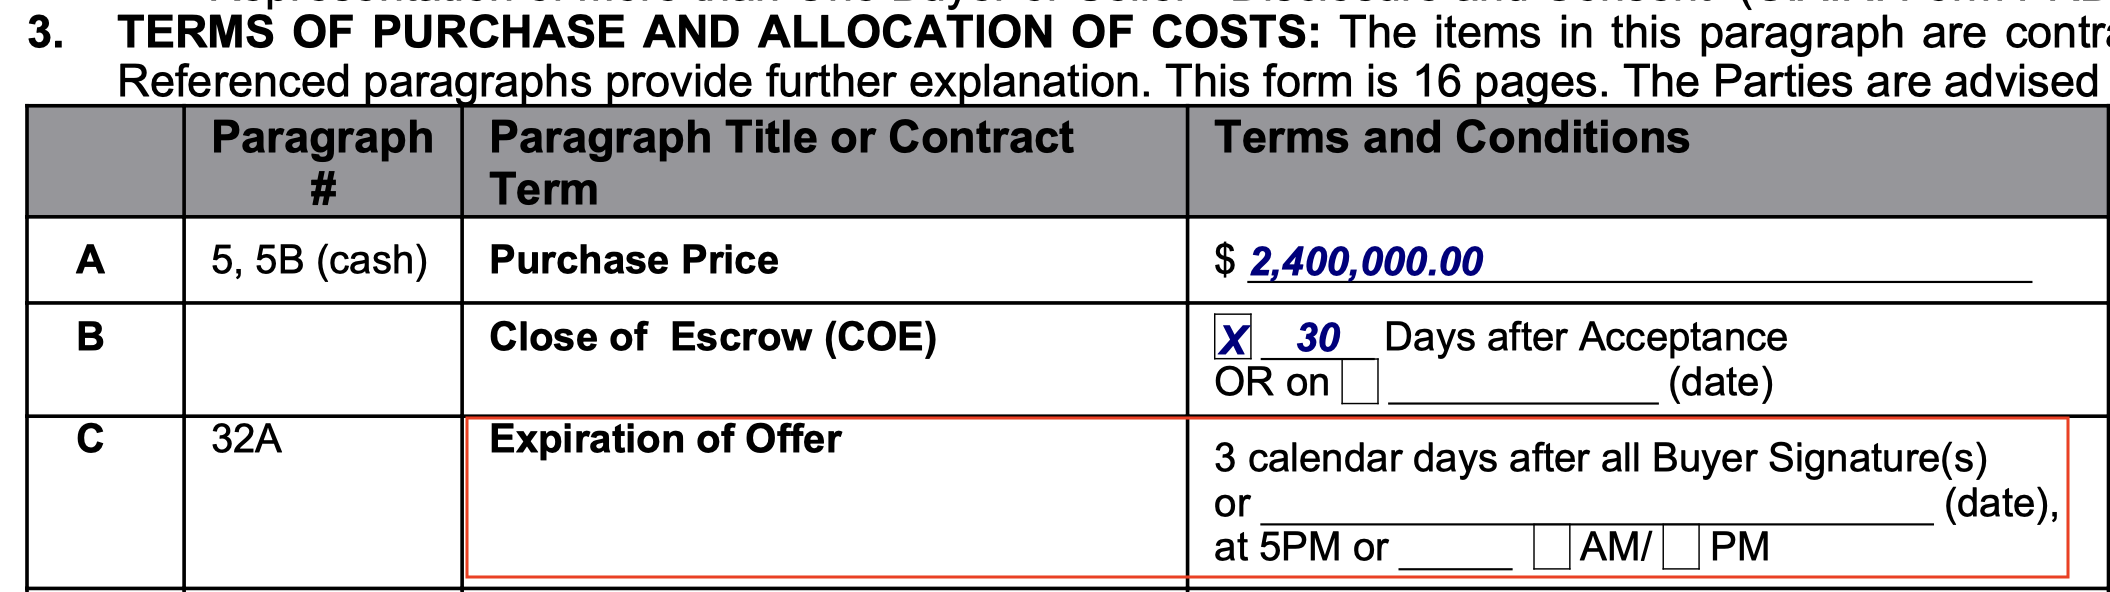 California RPA Offer Expiration Date